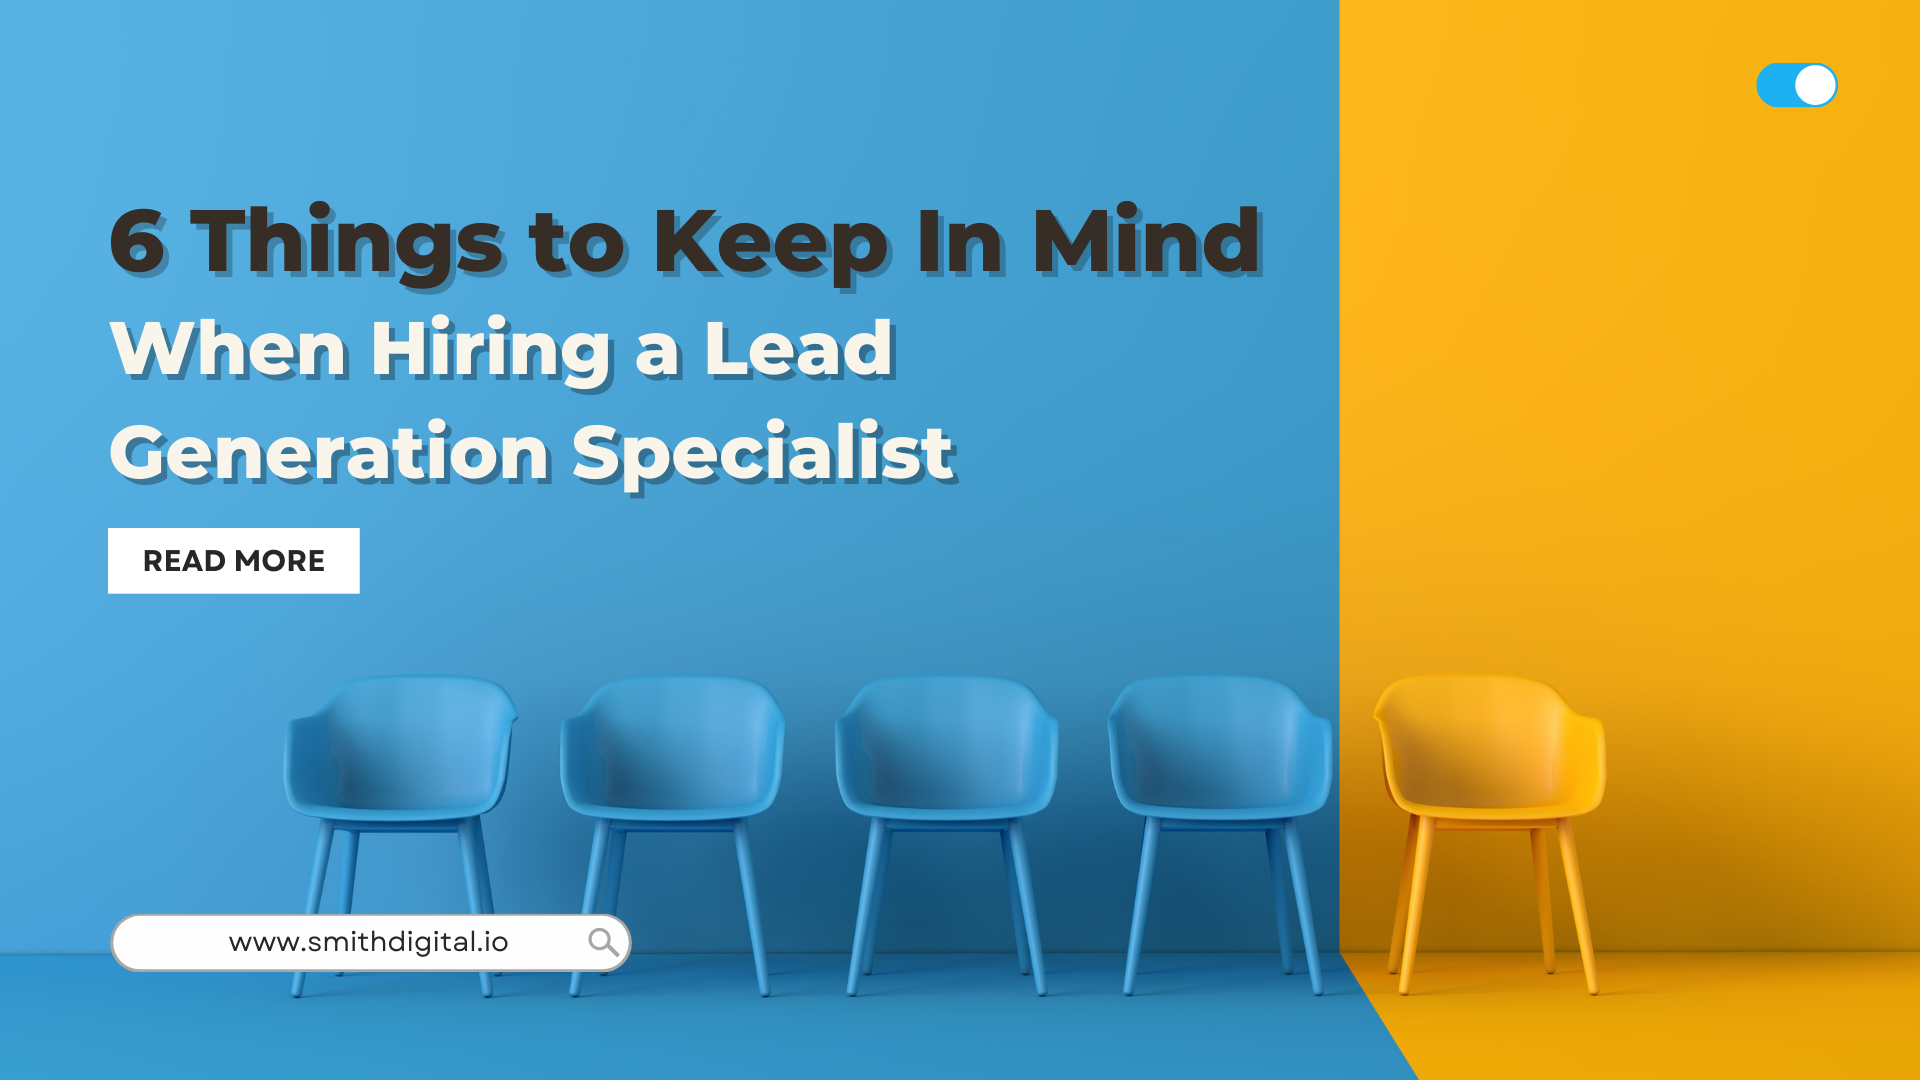 6 Things to Keep In Mind When Hiring a Lead Generation Specialist